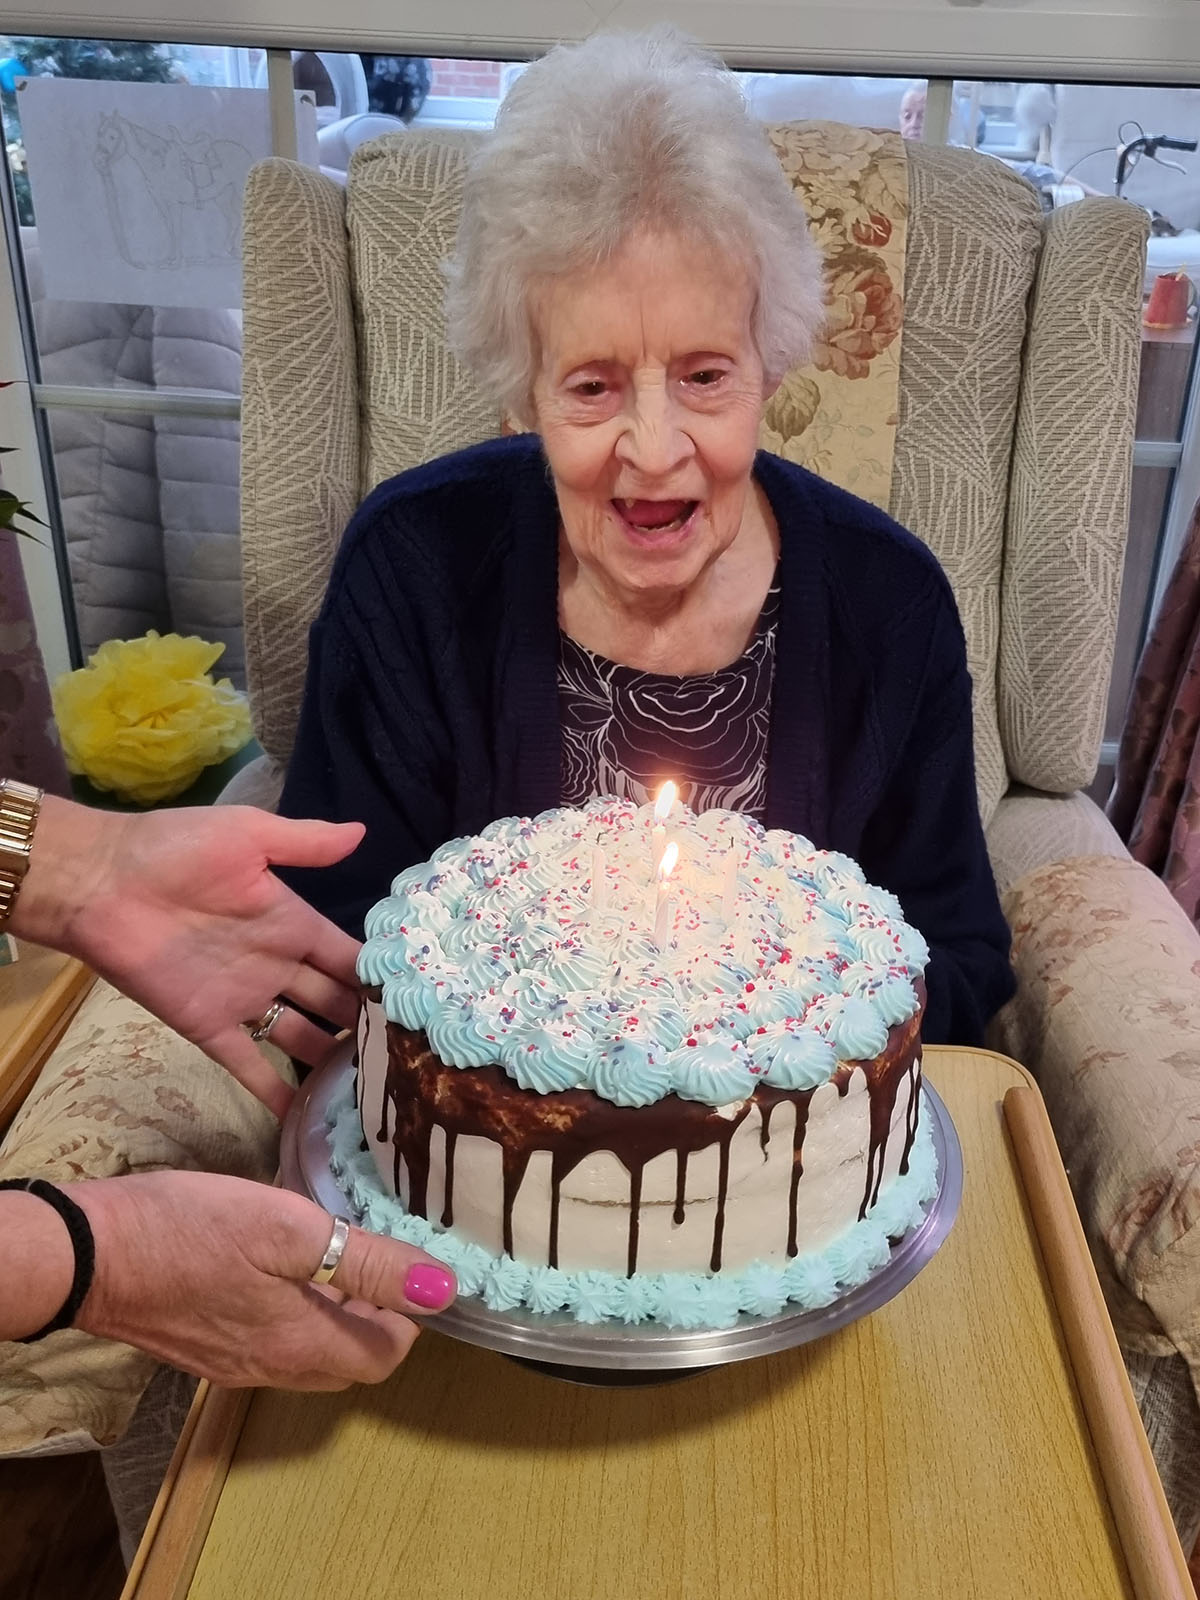 Pat with her birthday cake at Princess Christian Care Home